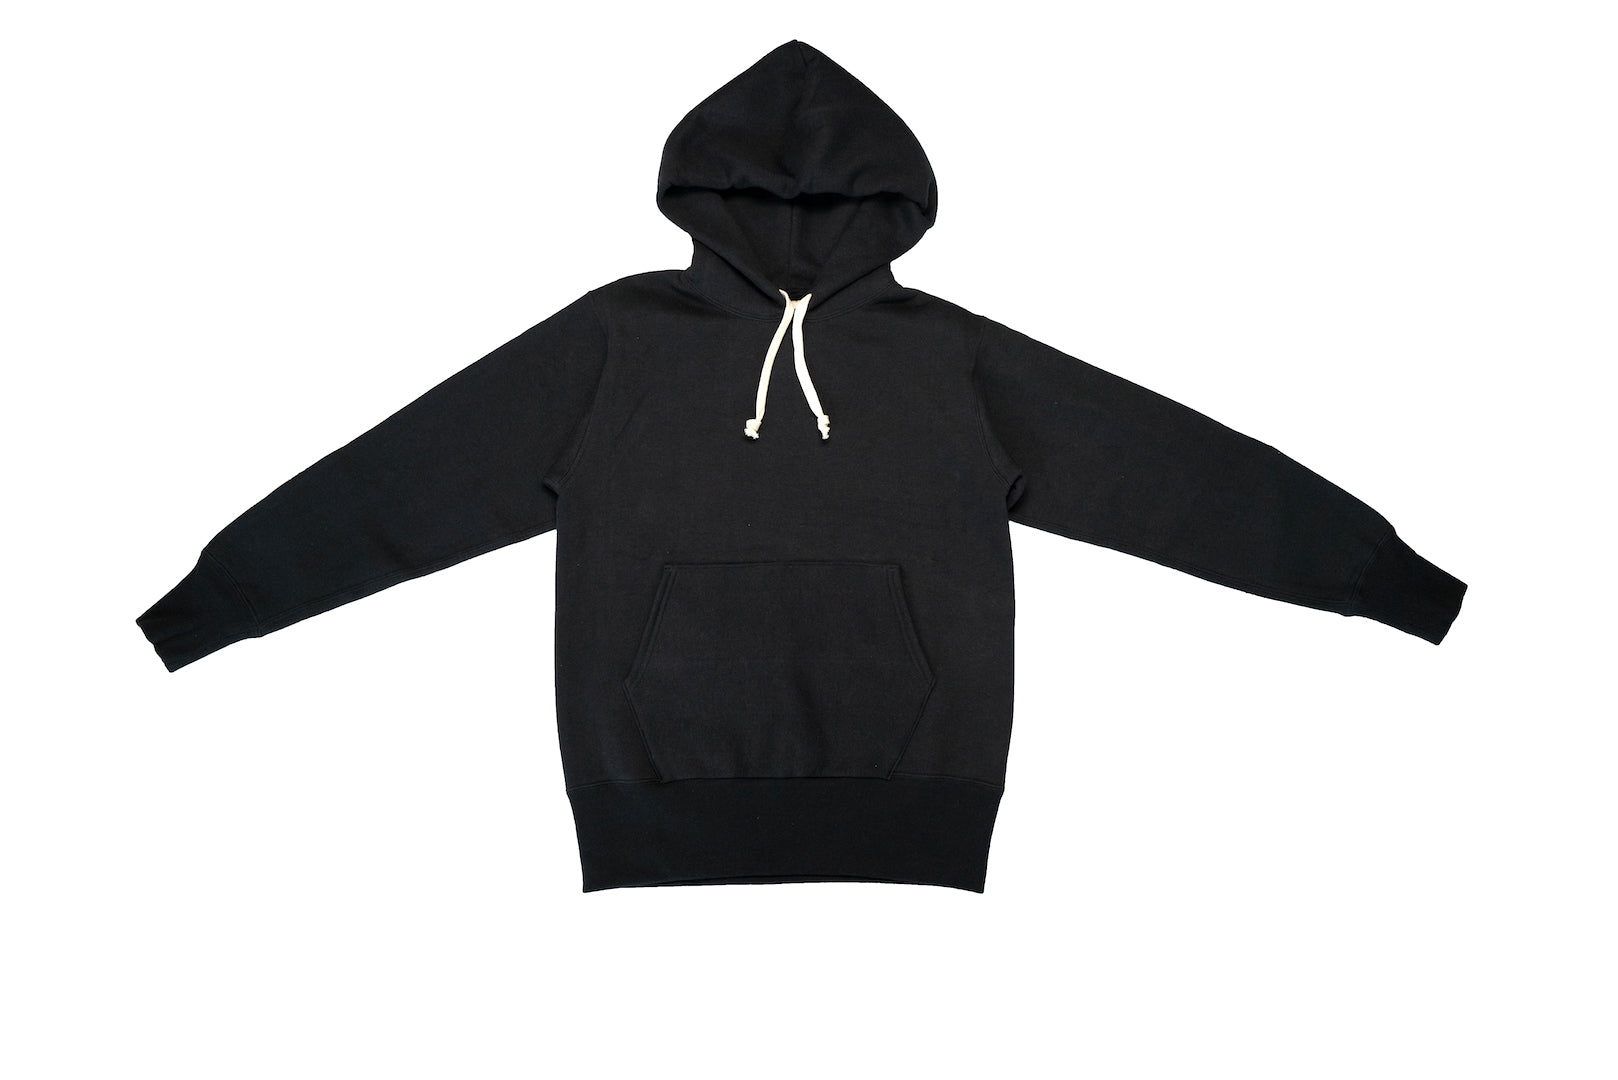 The Strike Gold x CORLECTION 12oz Loopwheeled Pull Over (Black)